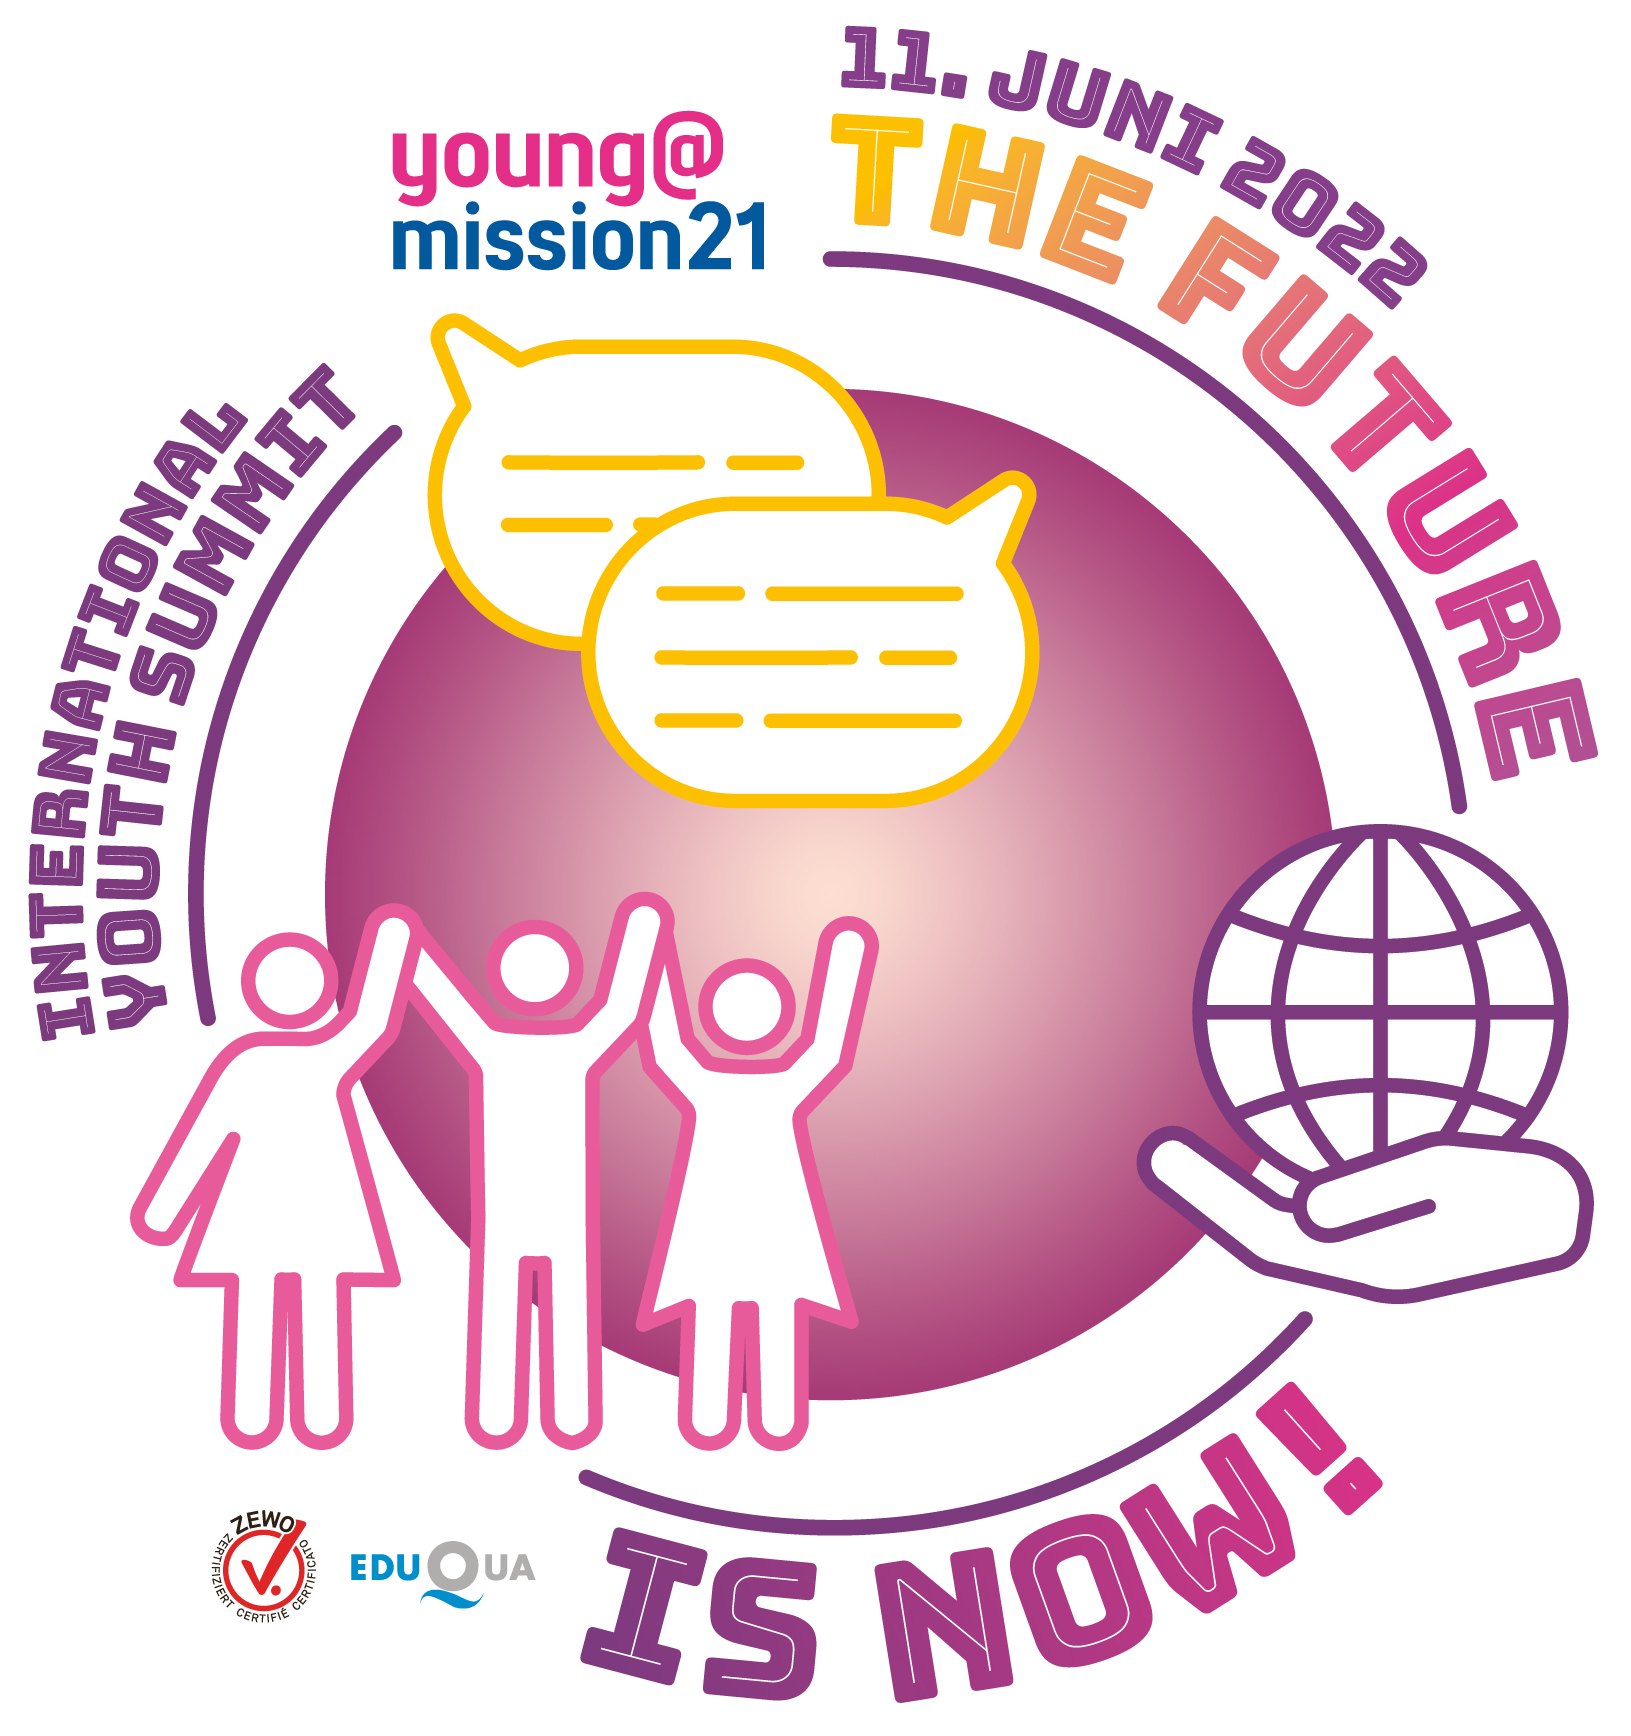 International Youth Summit: The future is now!